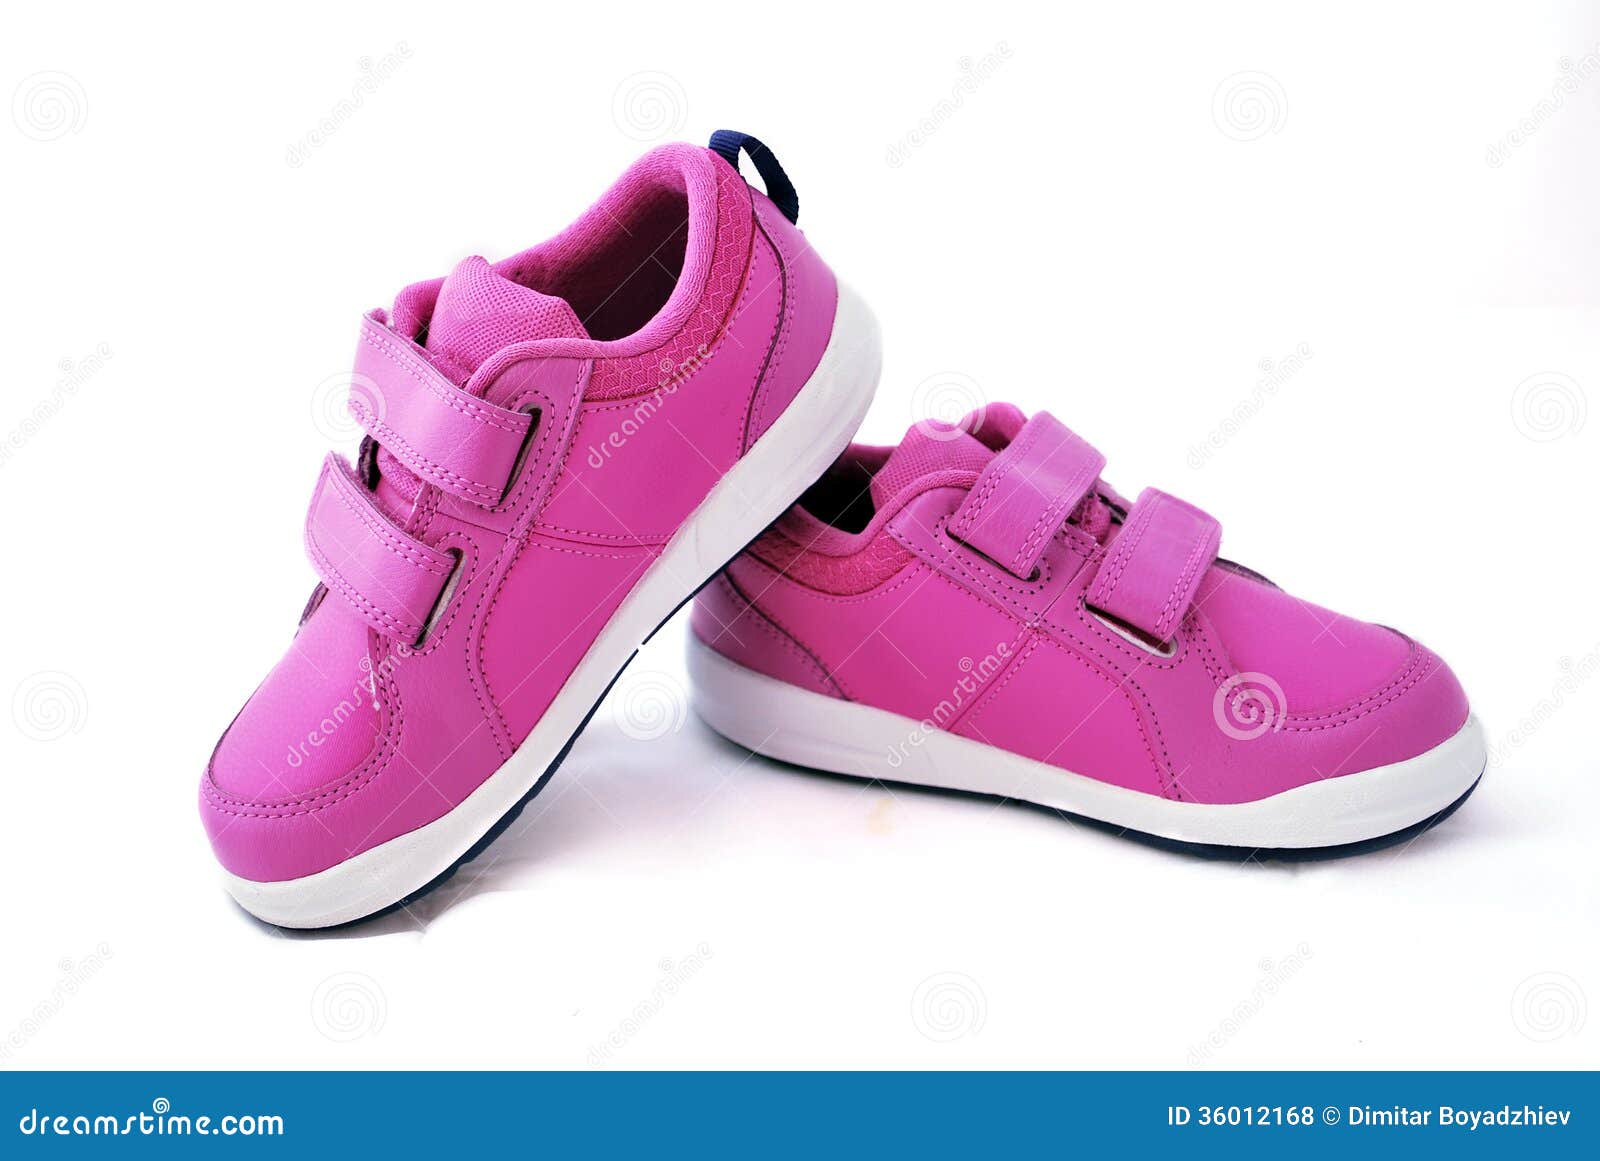 Sport shoes side stock photo. Image of isolated, exercising - 36012168